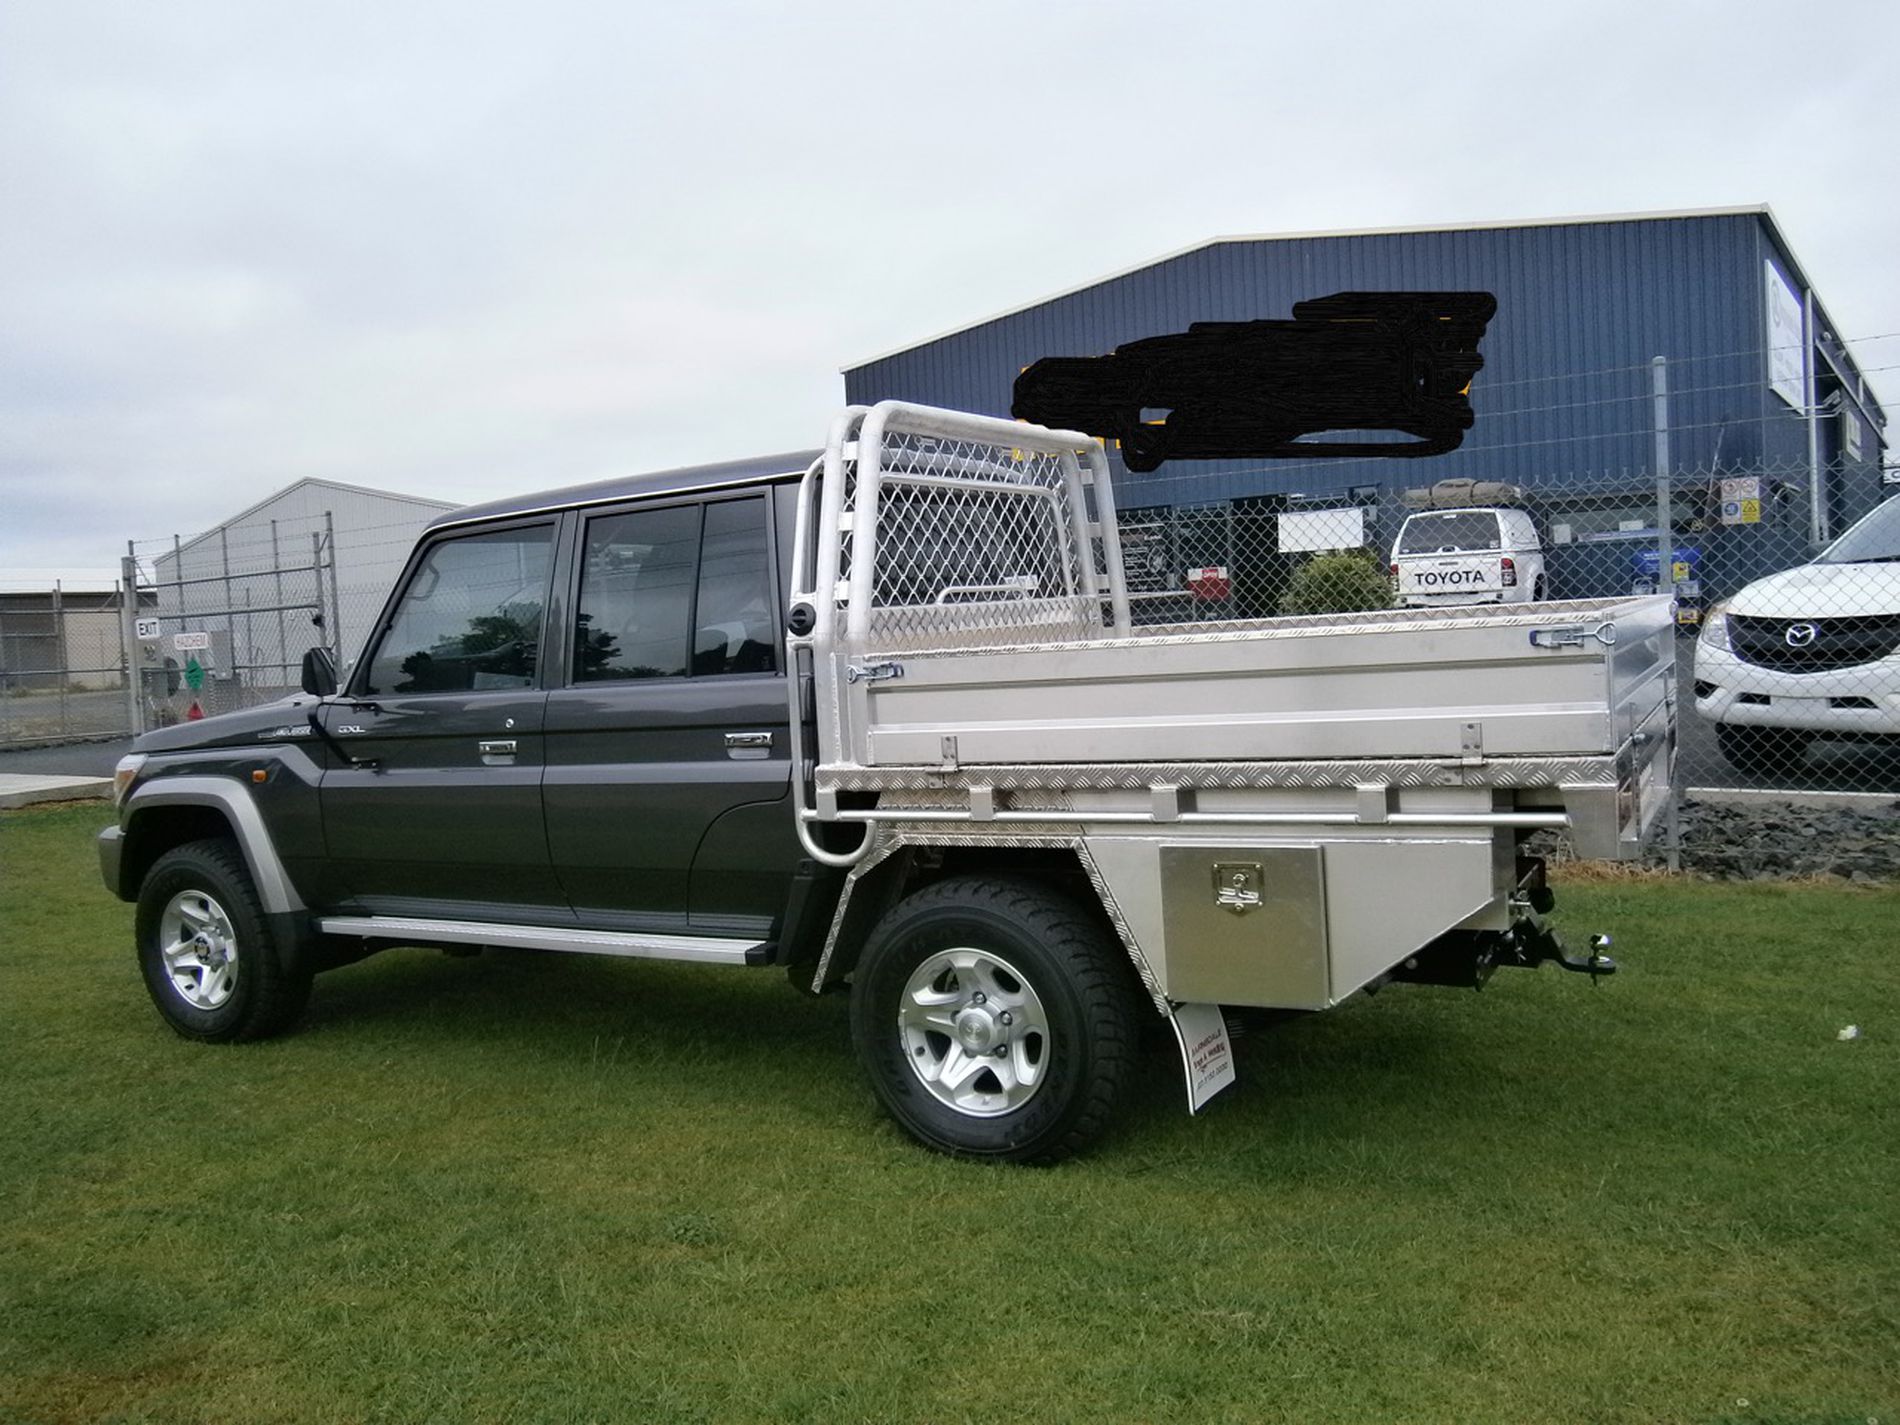 Trailer Manufacturing Business For Sale East Gippsland